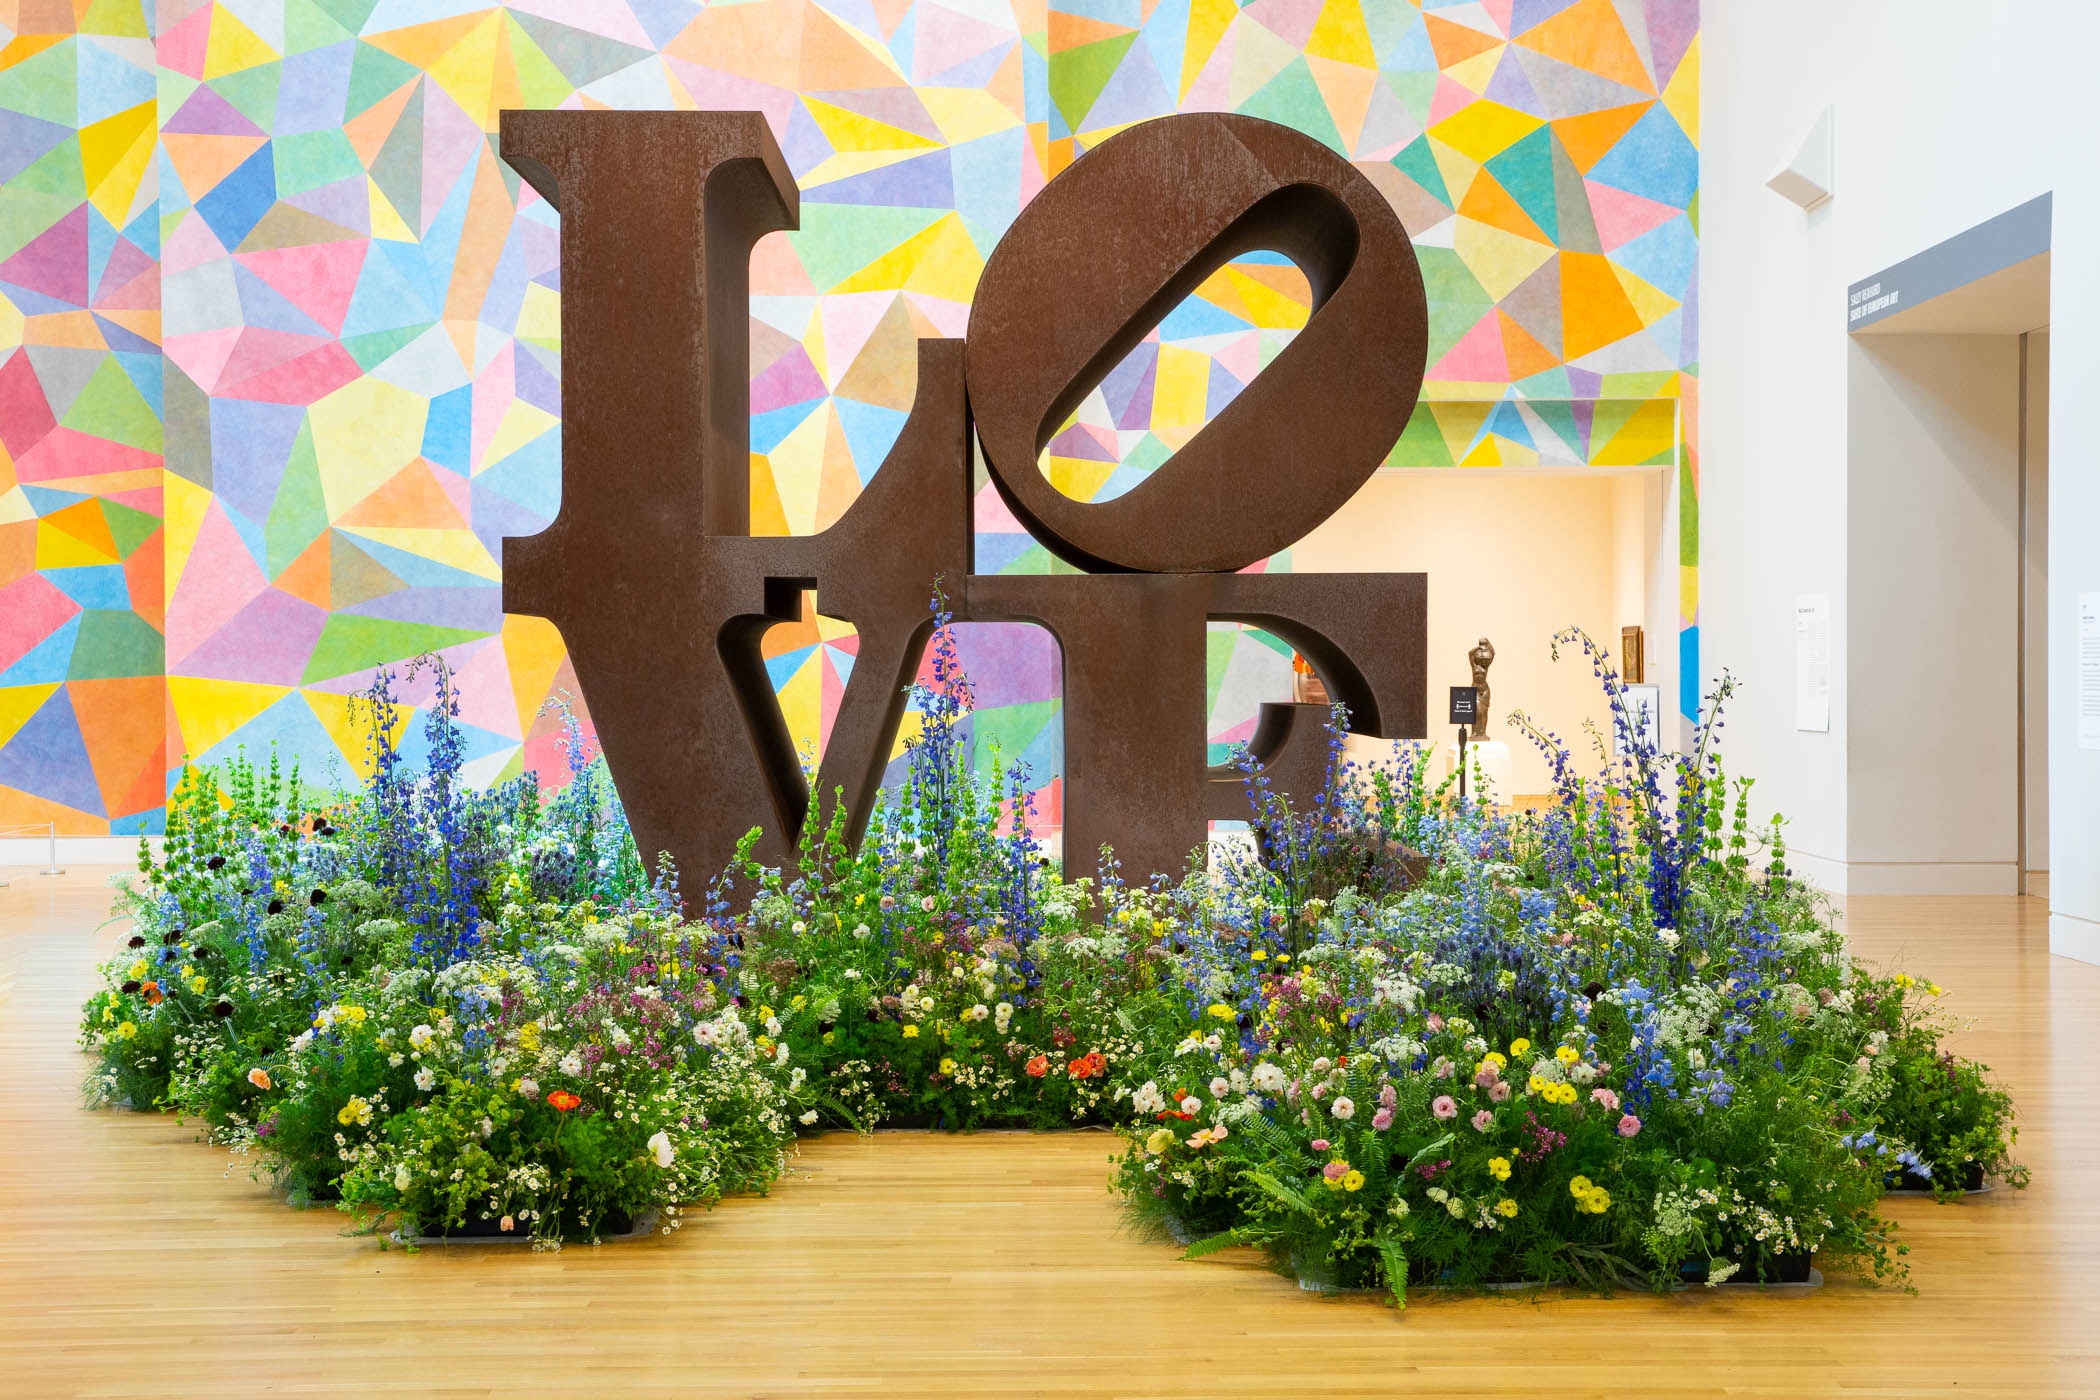 Image of Installation view of Art in Bloom. Robert Indiana (American, 1928–2018), LOVE, 1970, Cor-ten steel, 144 × 144 × 72 in. Indianapolis Museum of Art at Newfields, Gift of the Friends of the Indianapolis Museum of Art in memory of Henry F. DeBoest. Restoration was made possible by Patricia J. and James E. LaCrosse, 75.174 © Morgan Art Foundation / Artists Rights Society (ARS), New York.